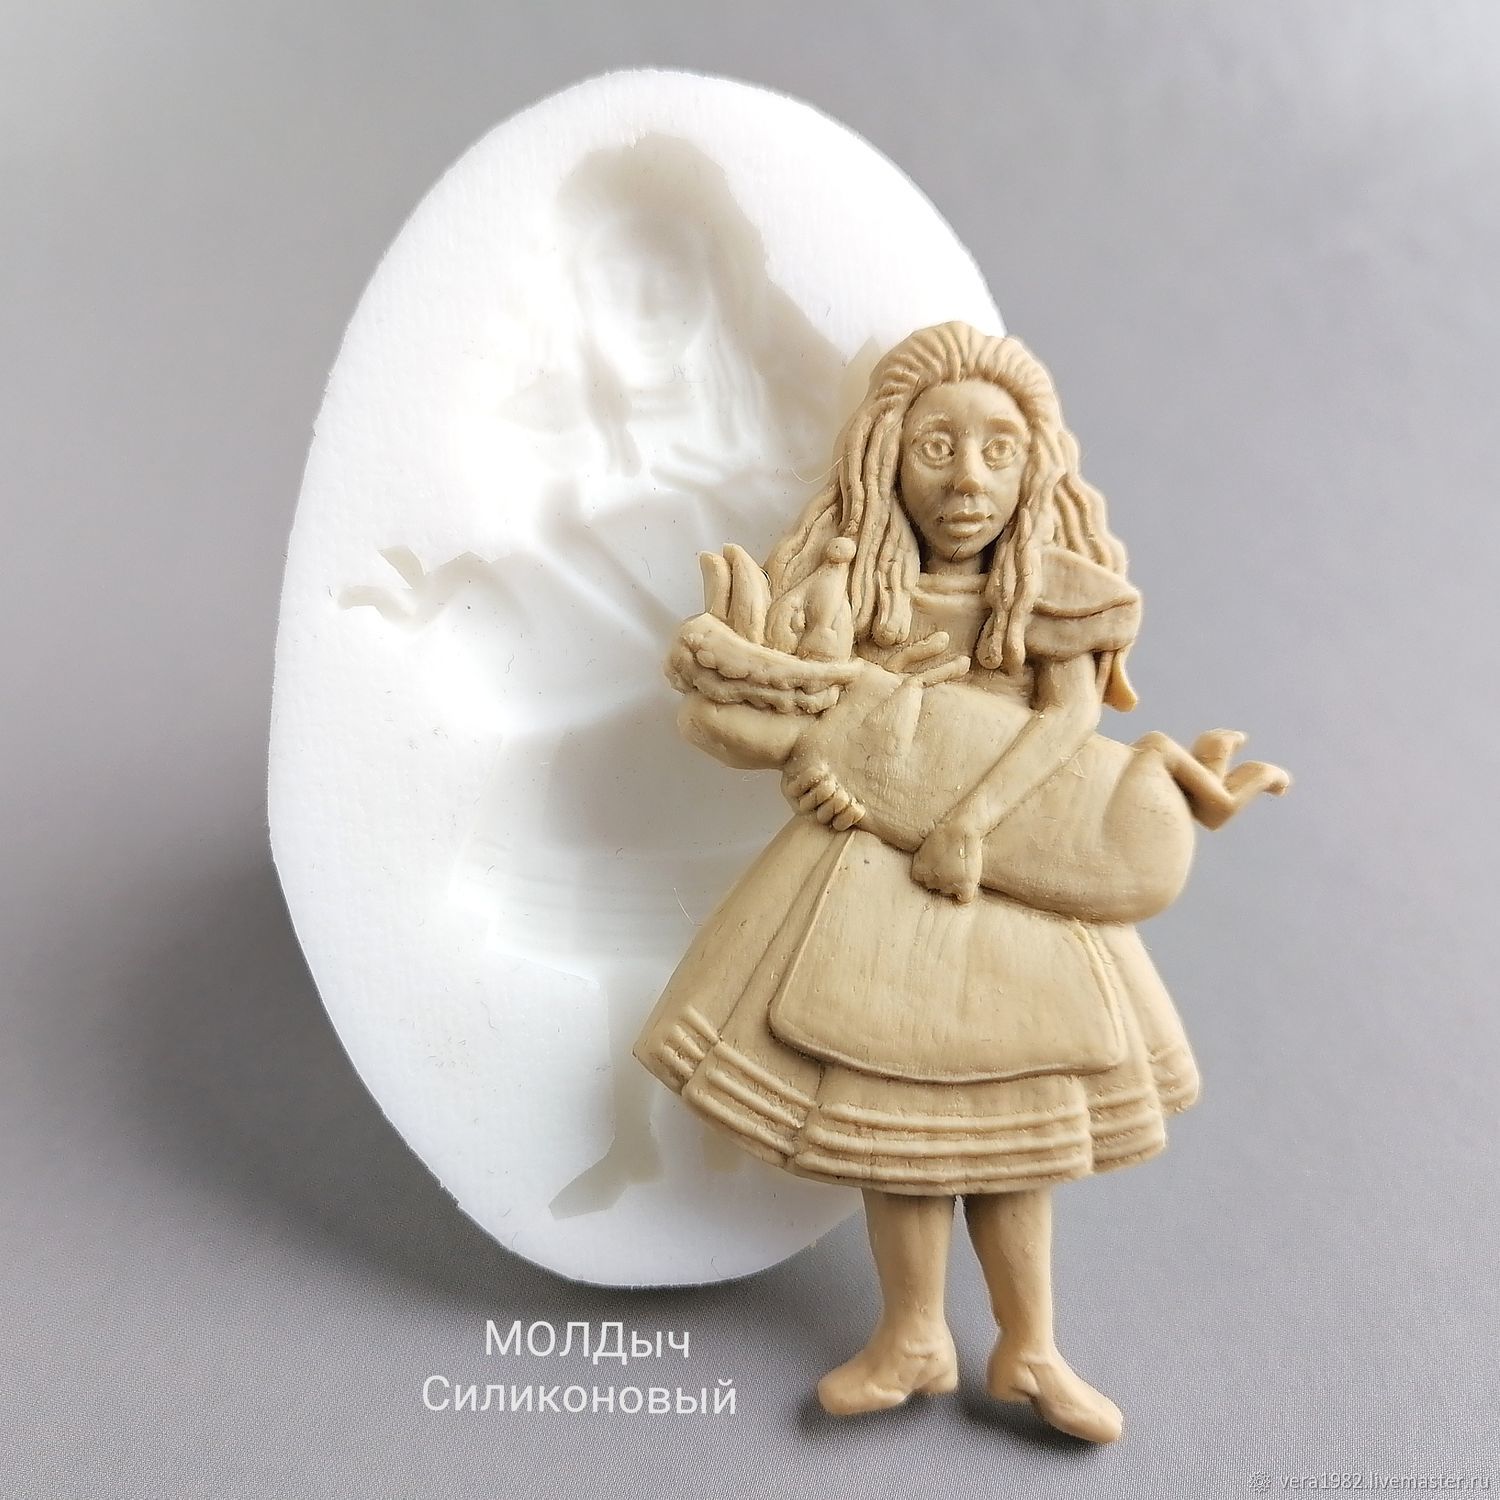 Mold Alice in Wonderland Silicone Mold, Molds for making flowers, Odintsovo,  Фото №1